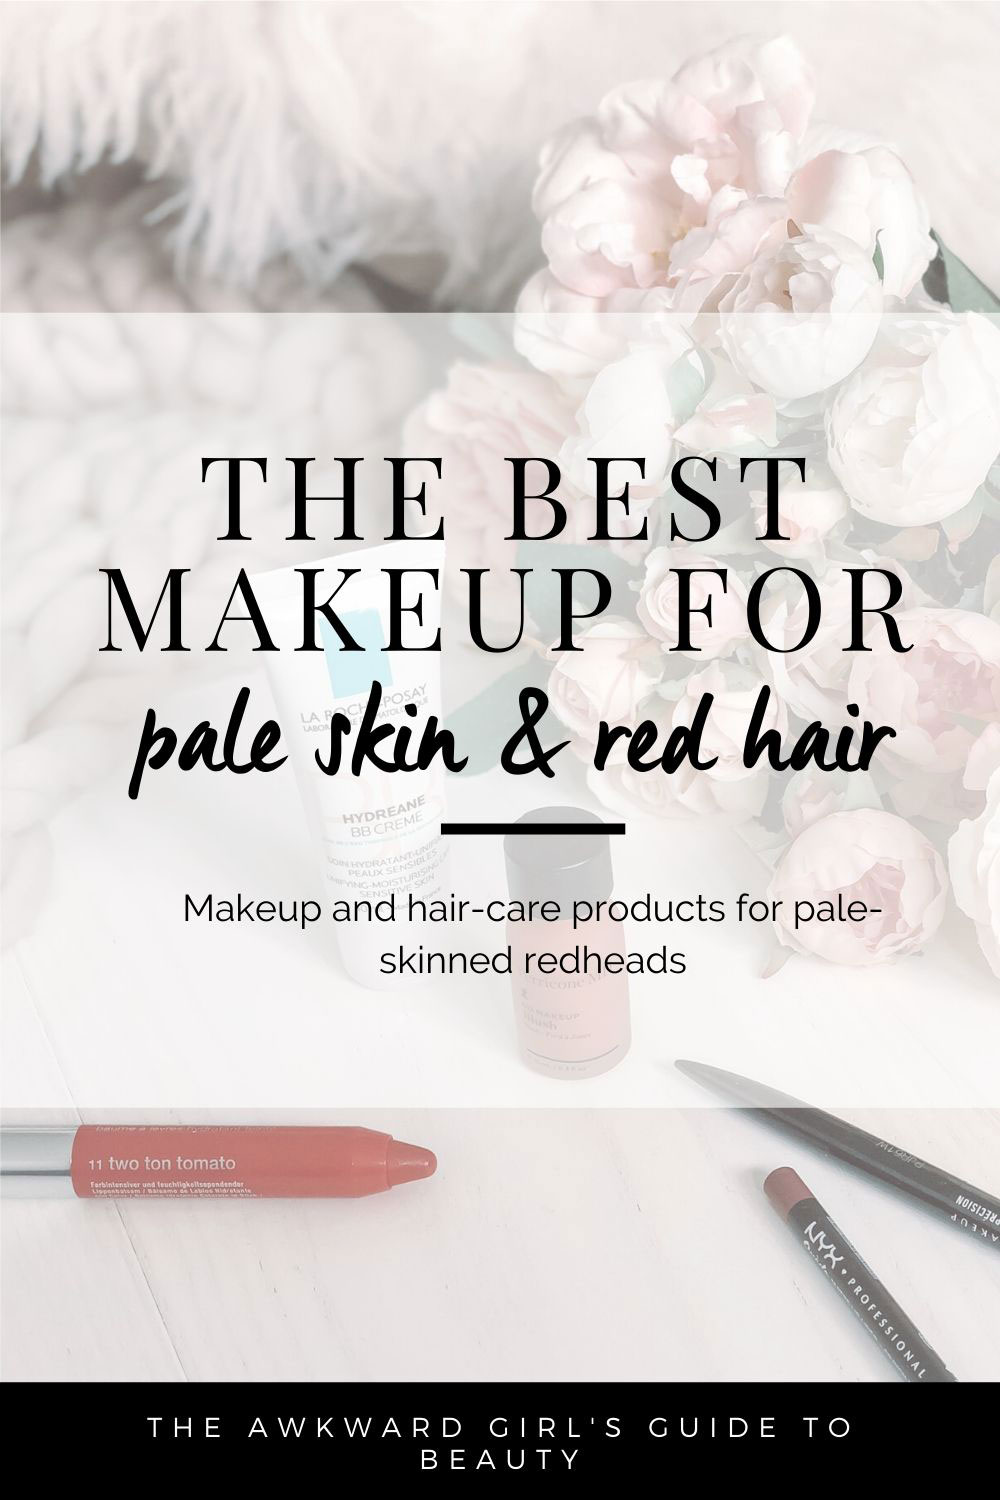 The best makeup for pale skin and red hair, reviewed by a pale redhead